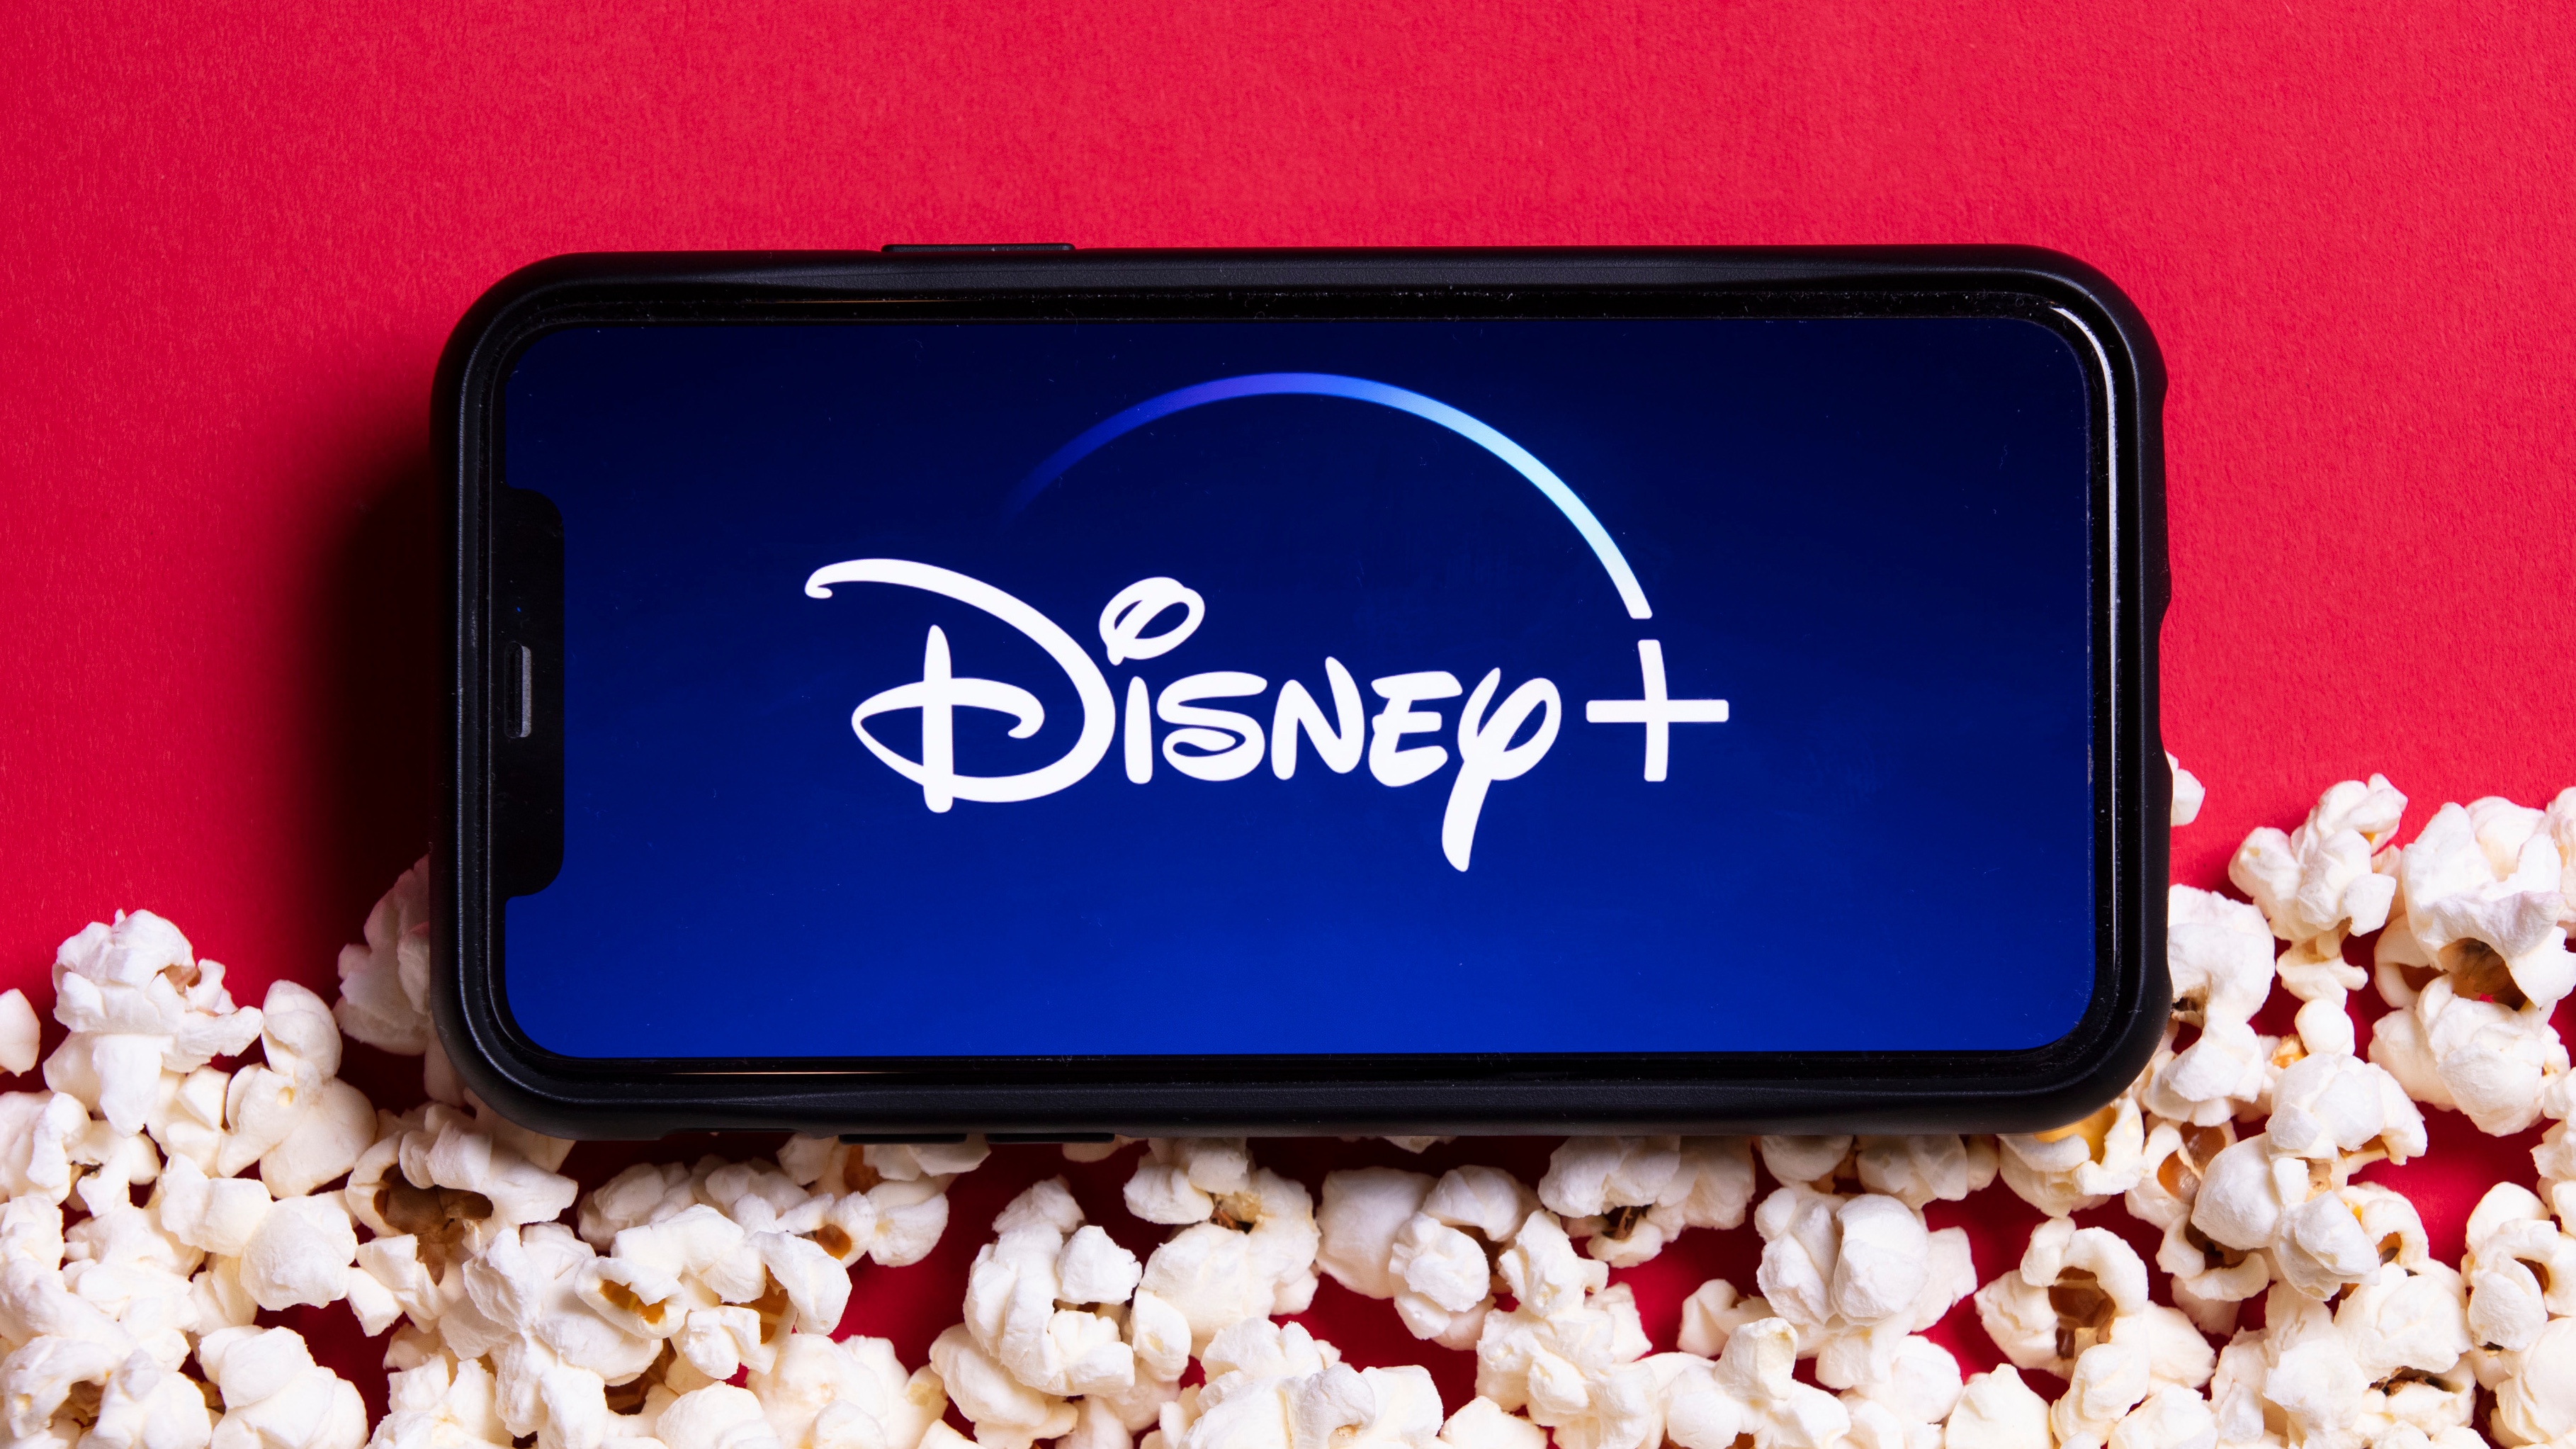 Disney Plus price, shows, and how to sign up